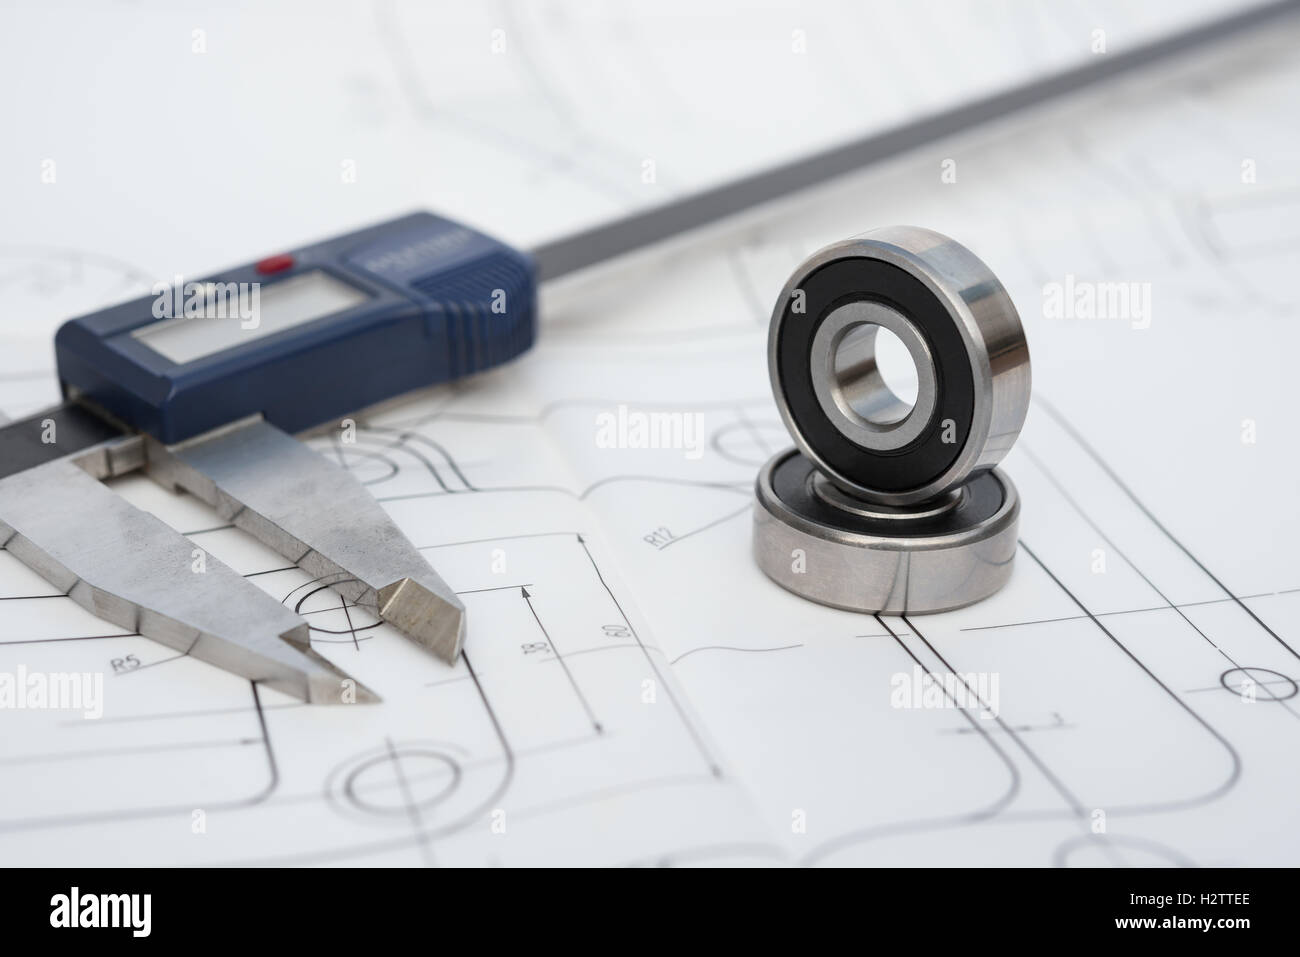 bearing and caliper on a mechanical engineering drawing Stock Photo